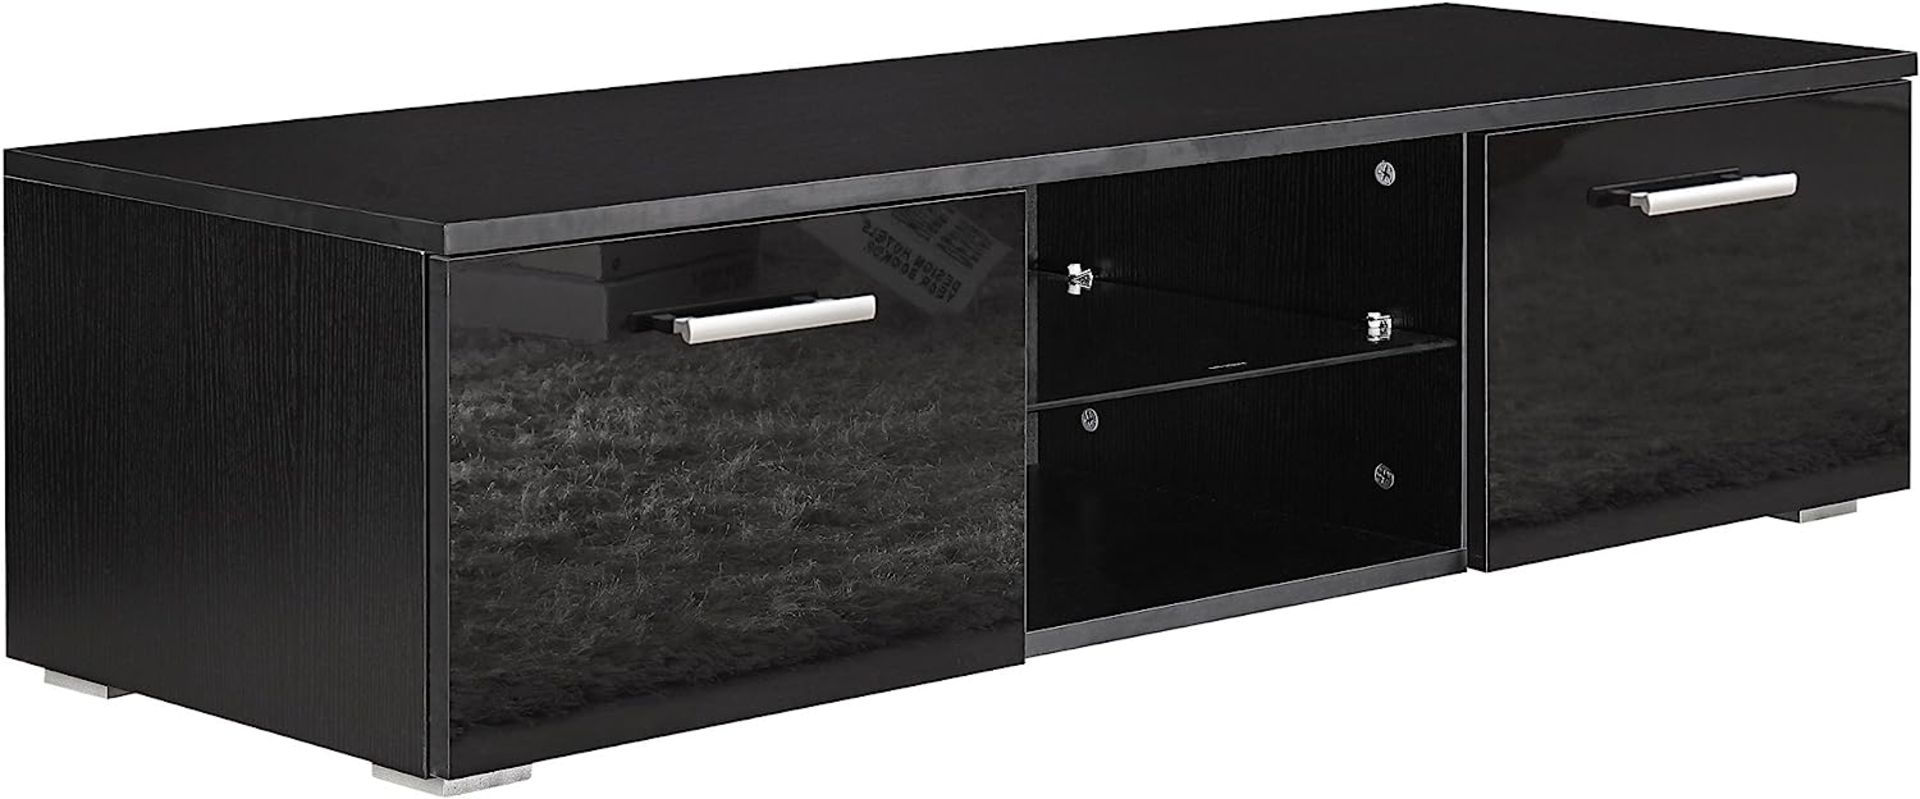 HARMIN MODERN 120CM TV STAND CABINET UNIT WITH HIGH GLOSS DOORS (BLACK ON BLACK) - Image 3 of 9